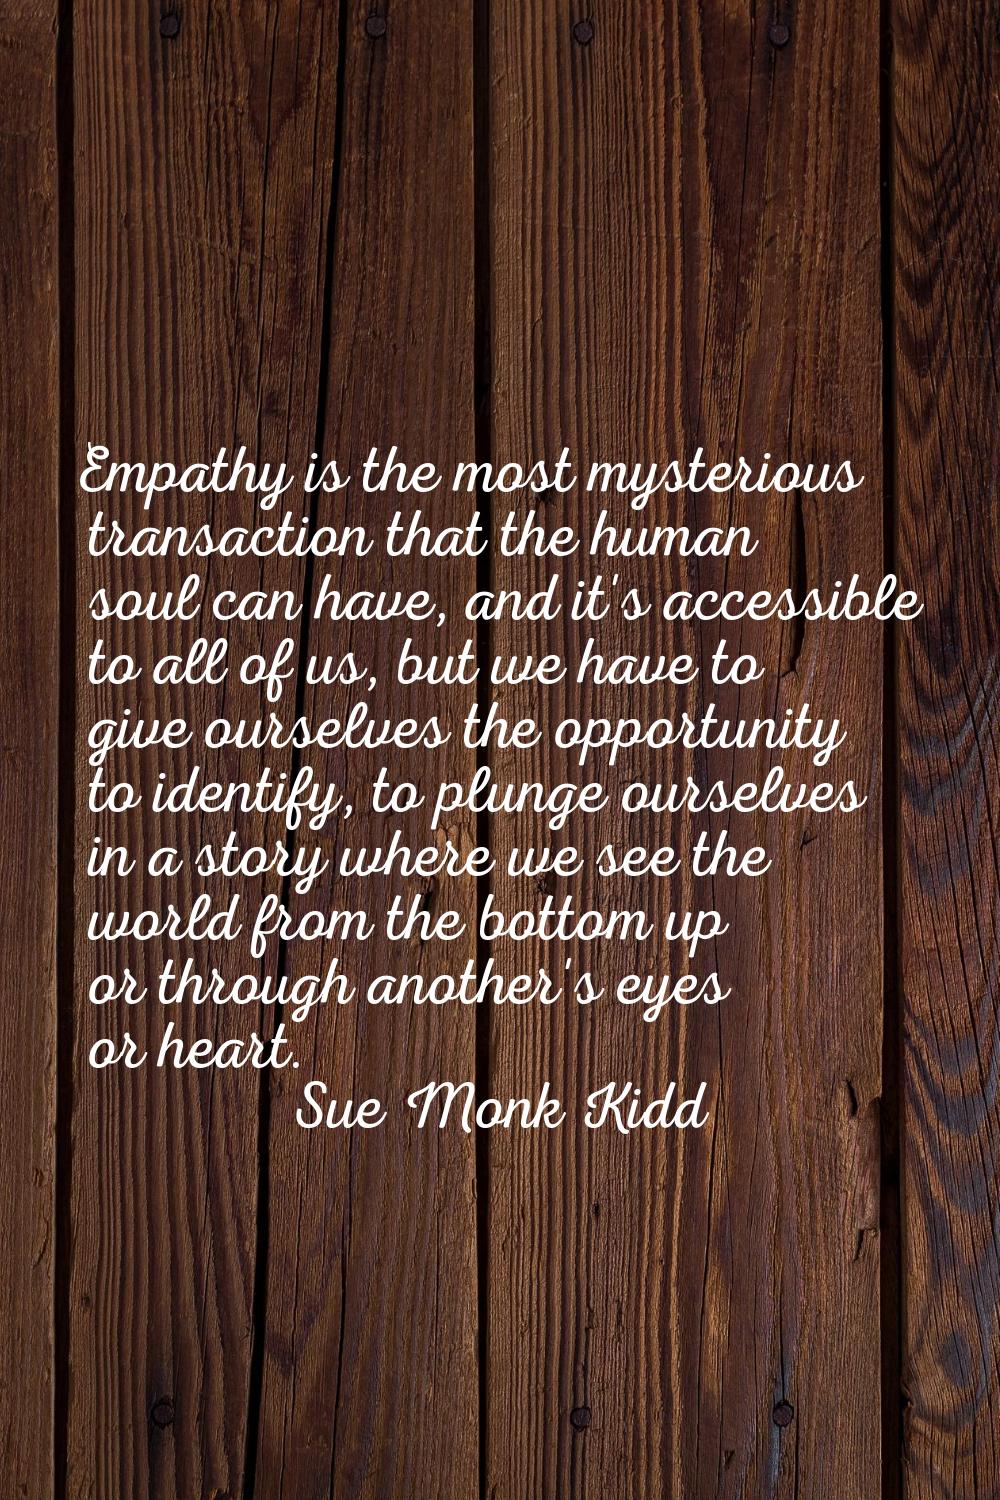 Empathy is the most mysterious transaction that the human soul can have, and it's accessible to all